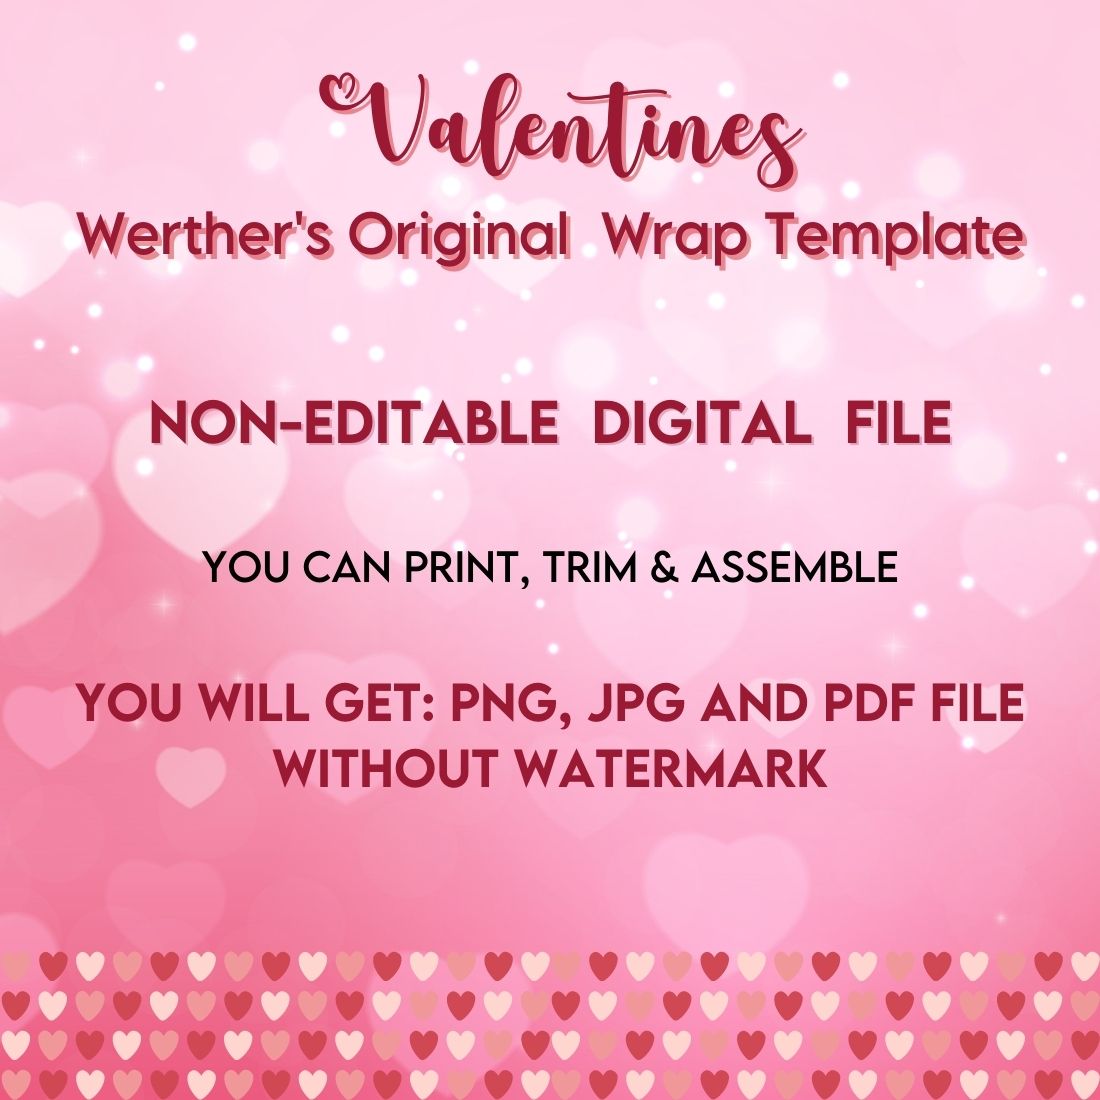 Valentines Werther's Original Wrap Template preview image.